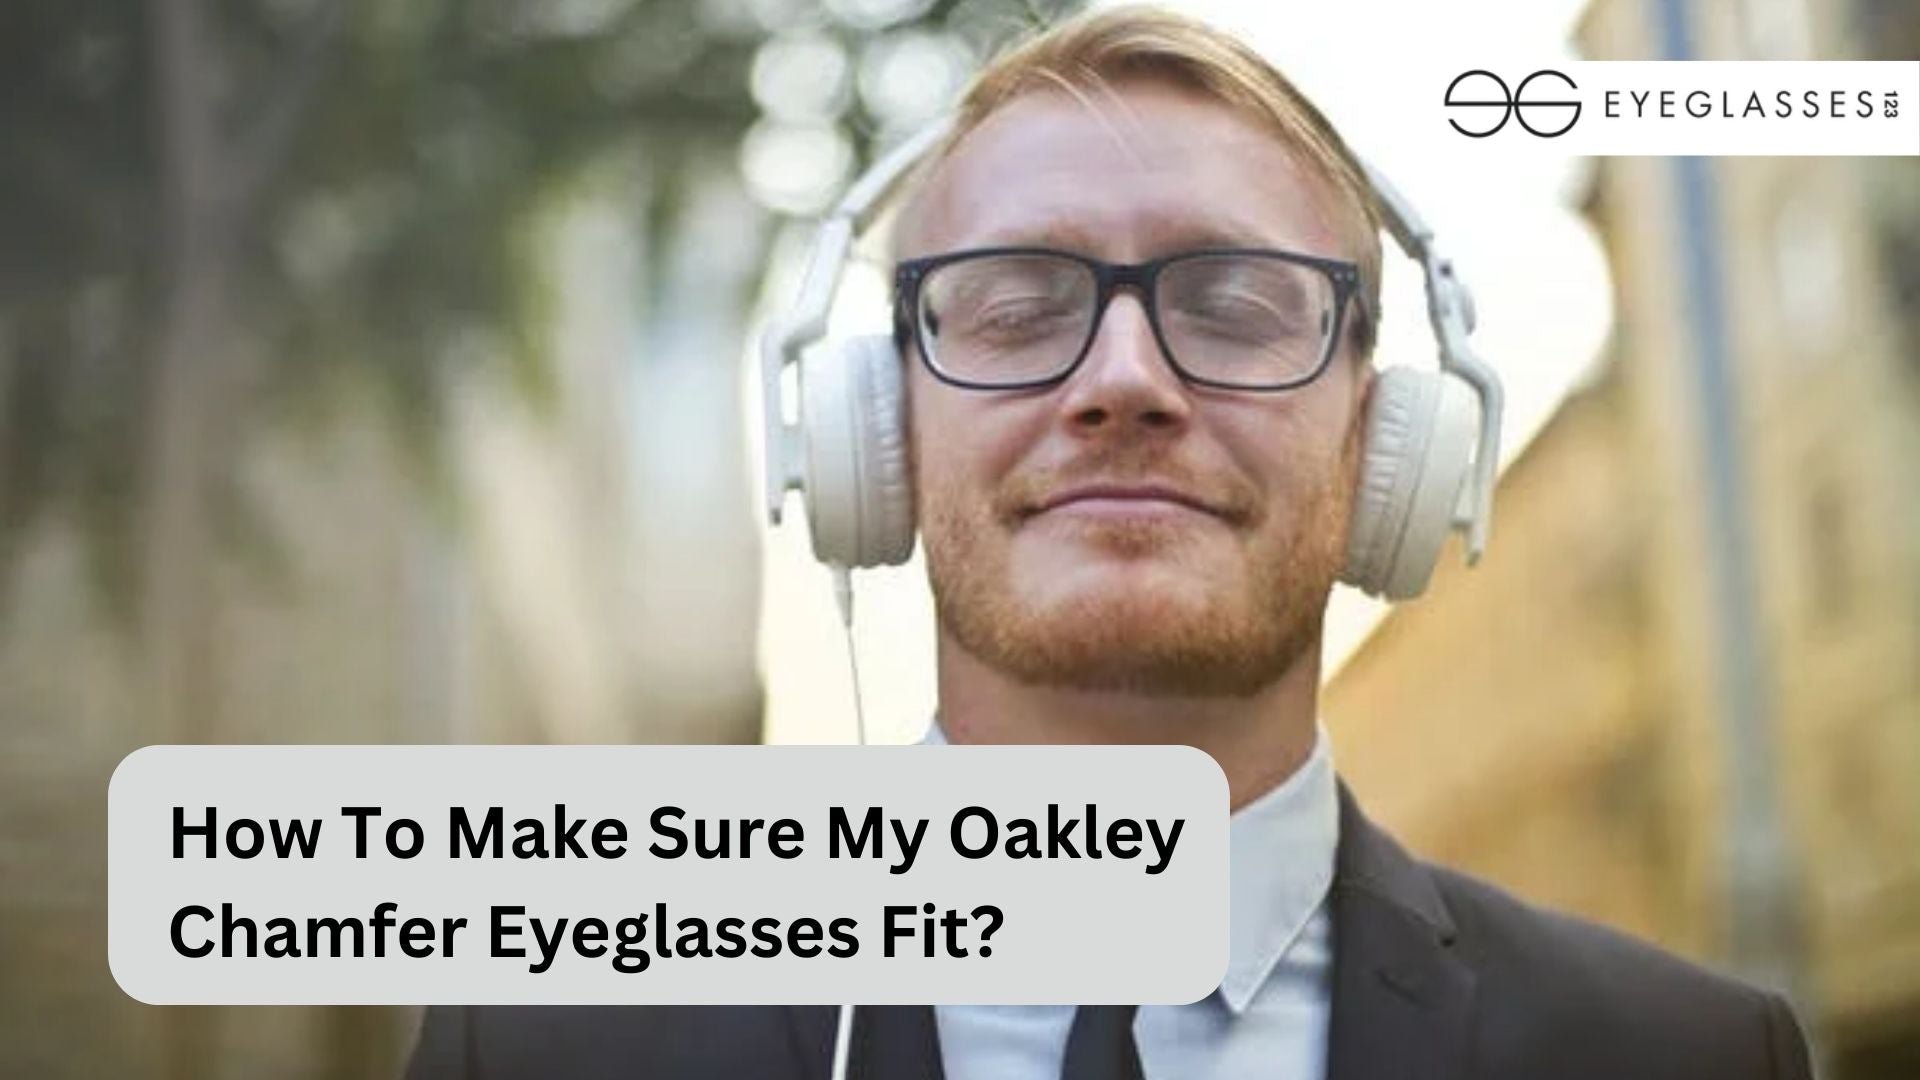 How To Make Sure My Oakley Chamfer Eyeglasses Fit?